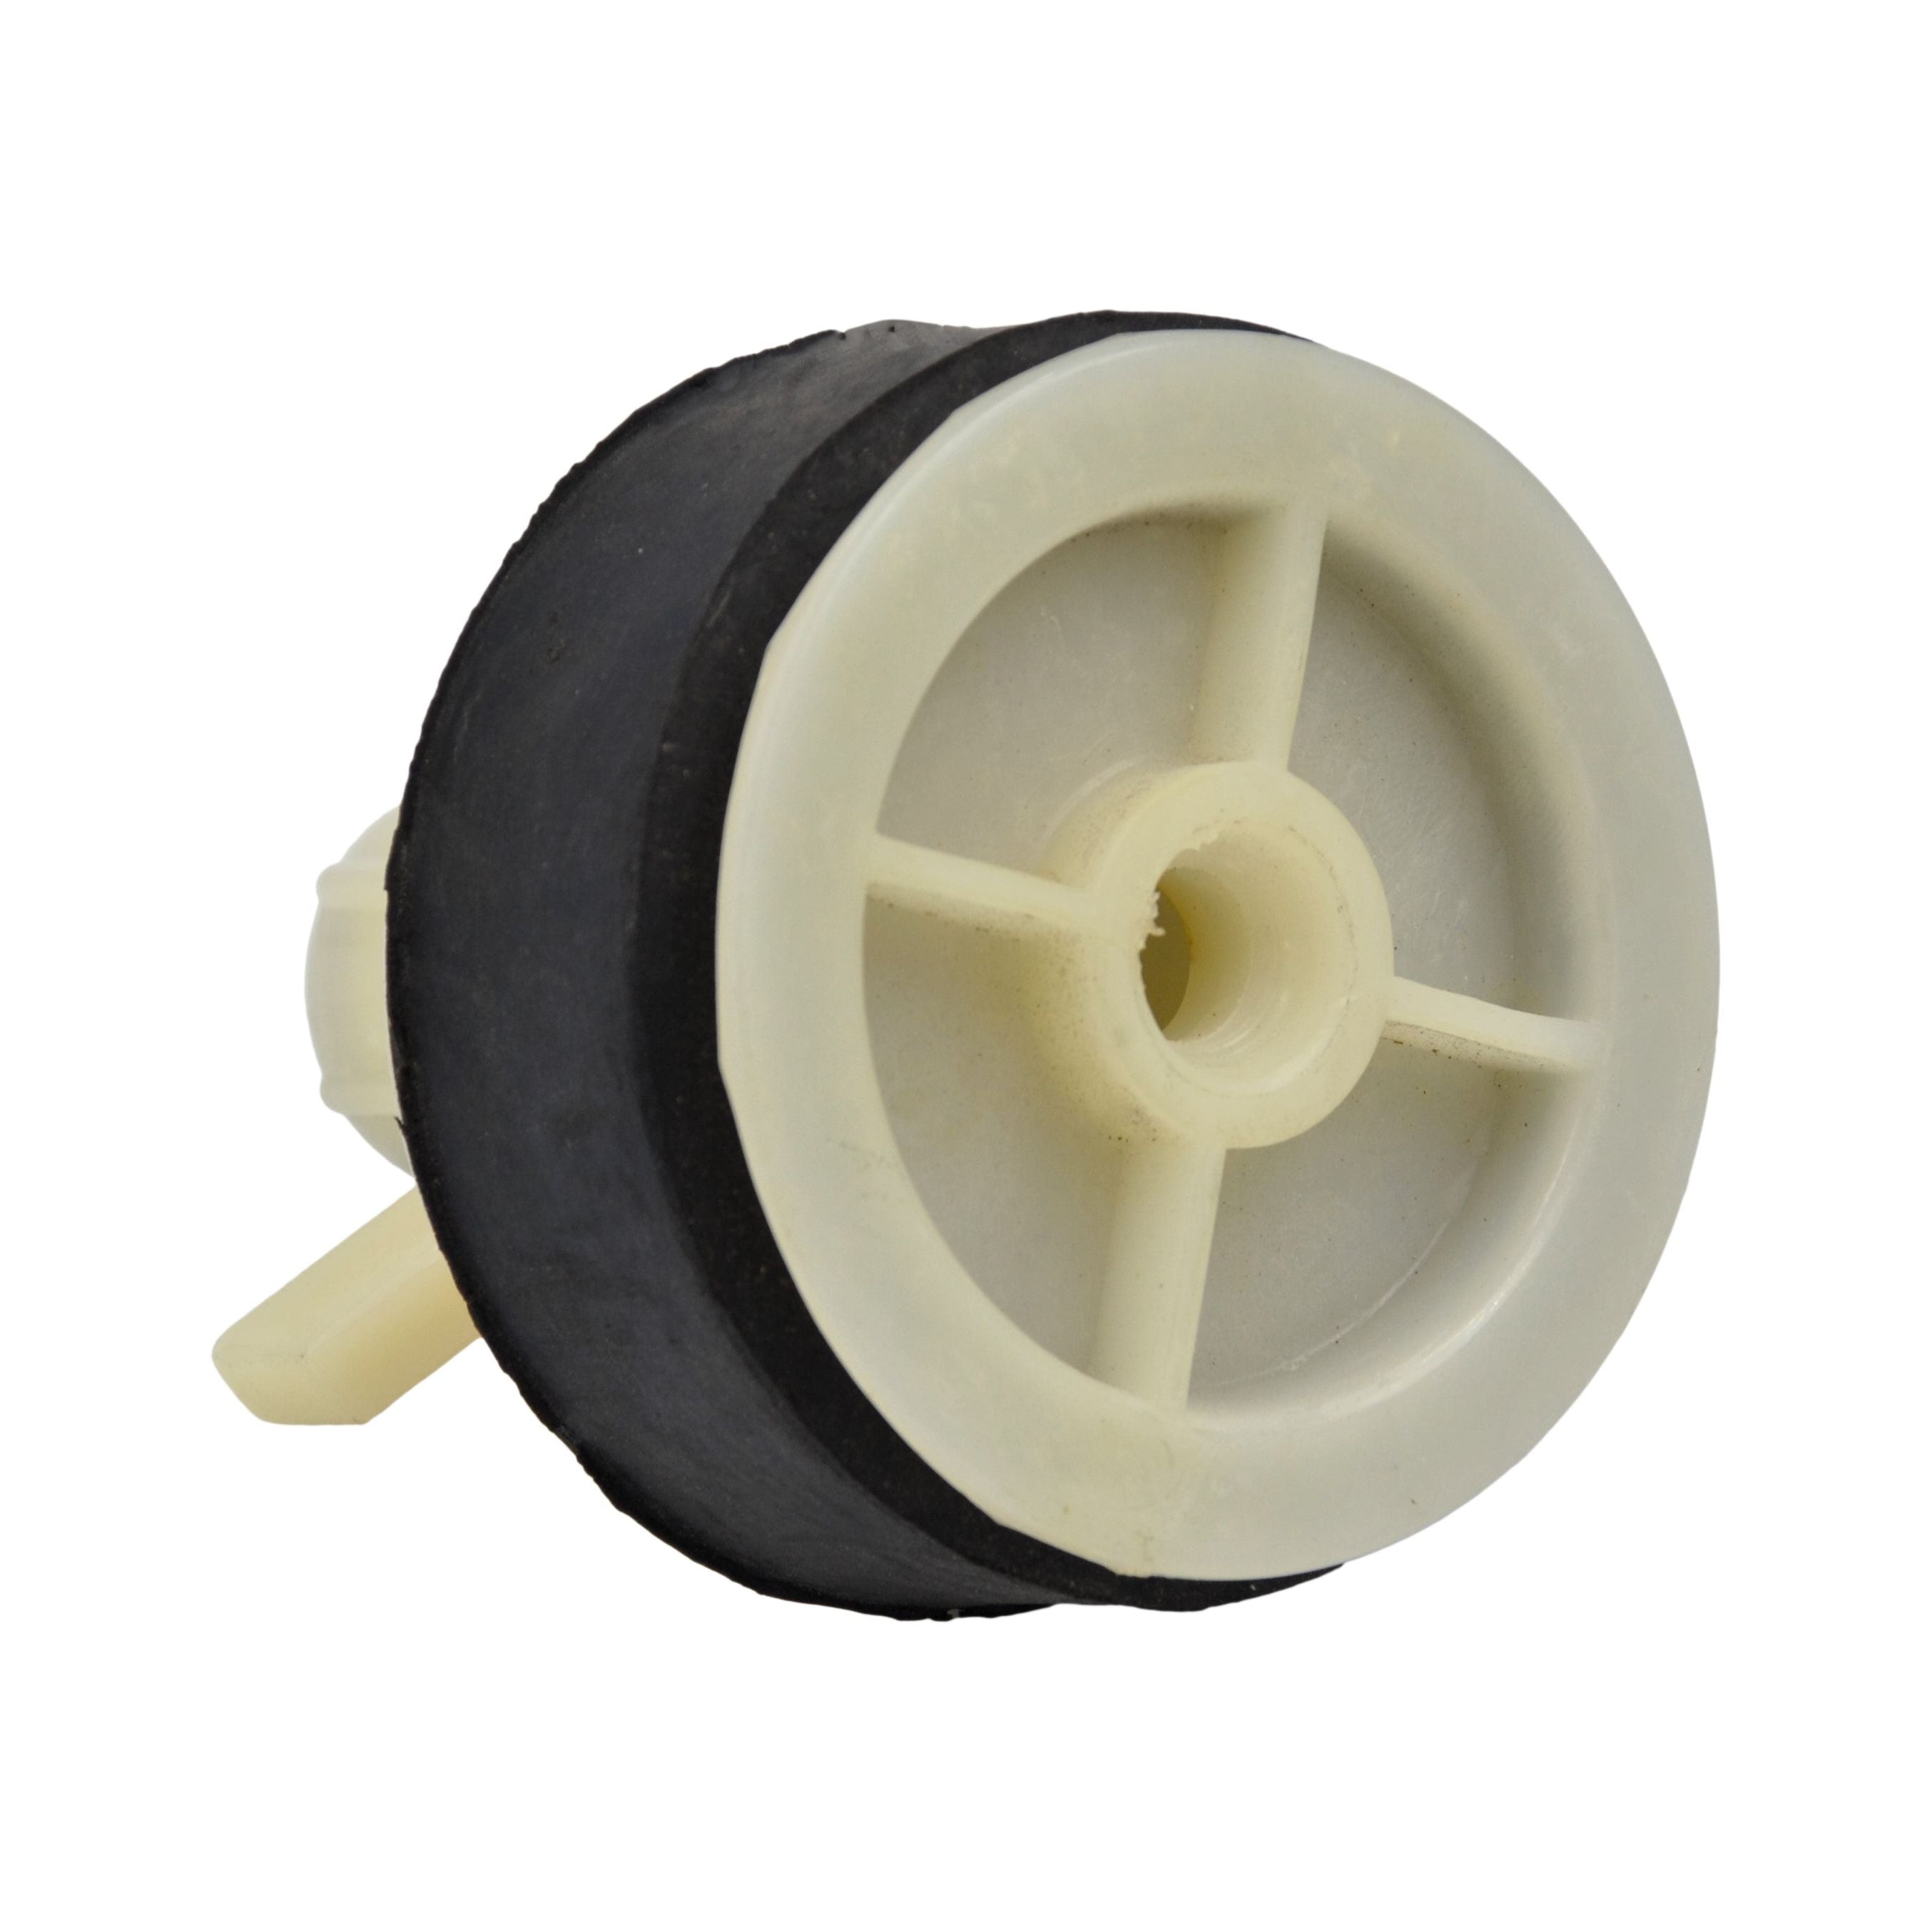 Nylon Mechanical Pipe Test plug bung with 13mm bypass 63mm to 76mm